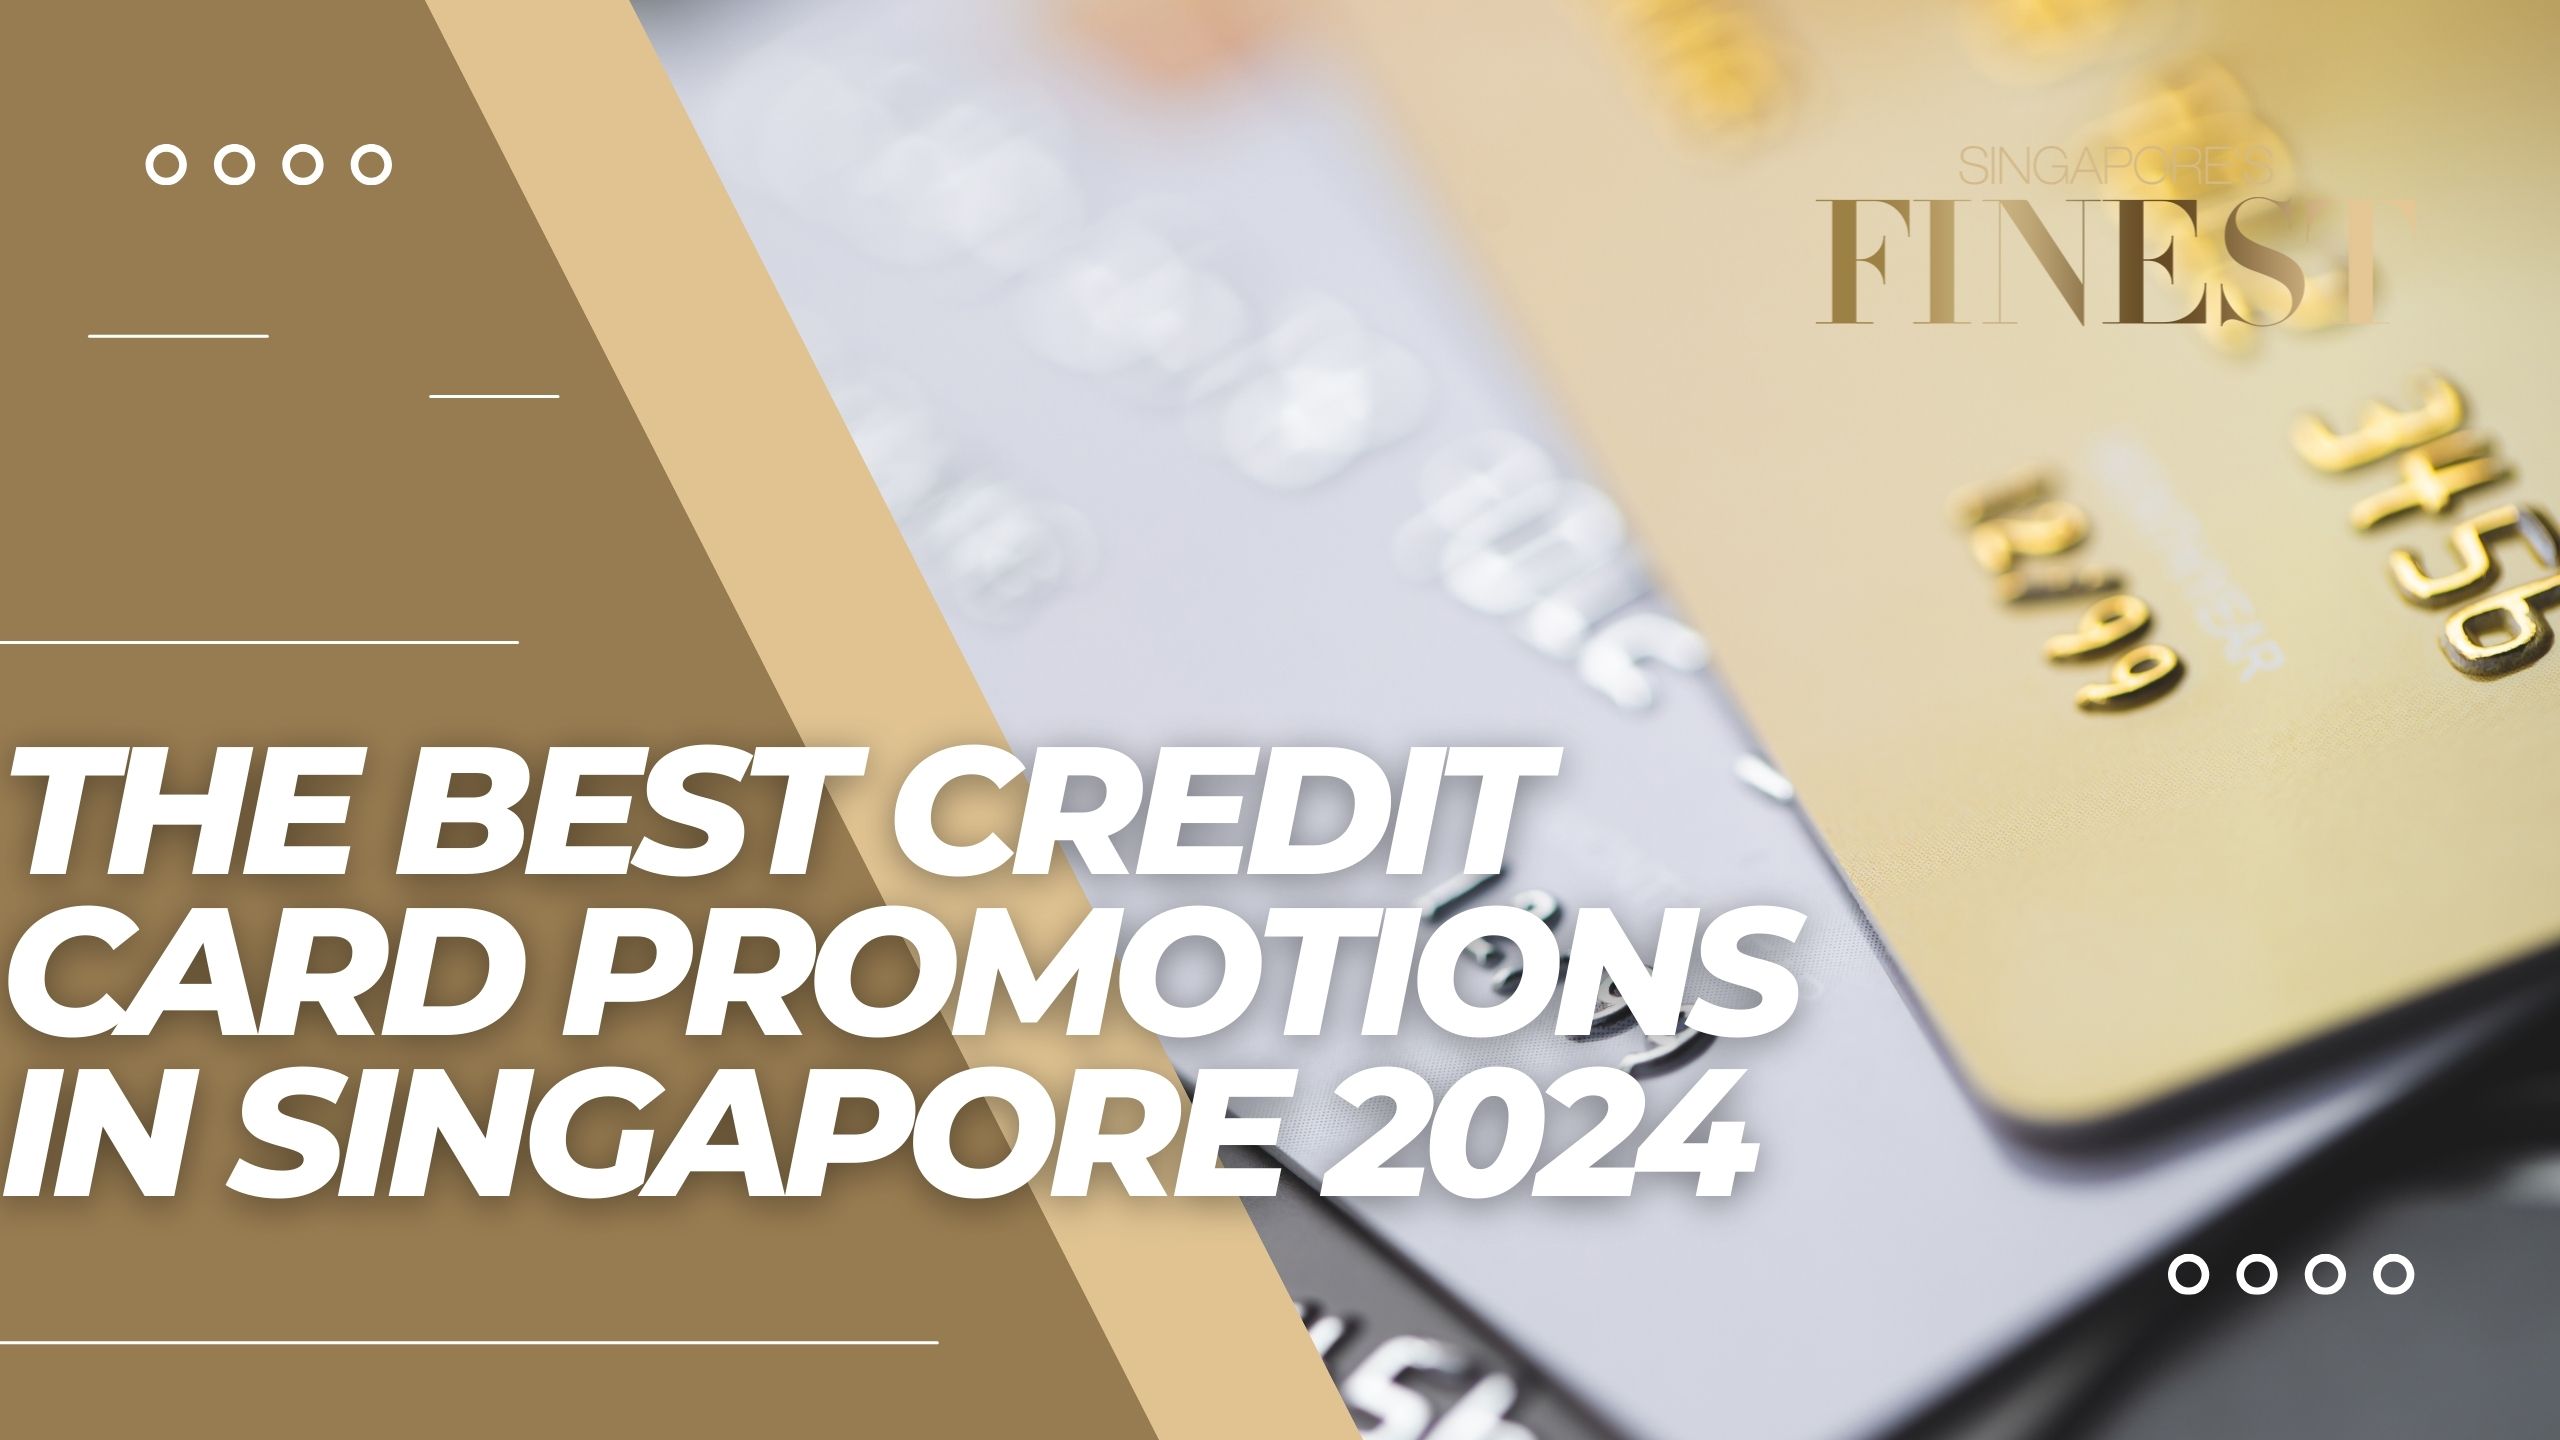 Best Credit Card Promotions in Singapore 2024